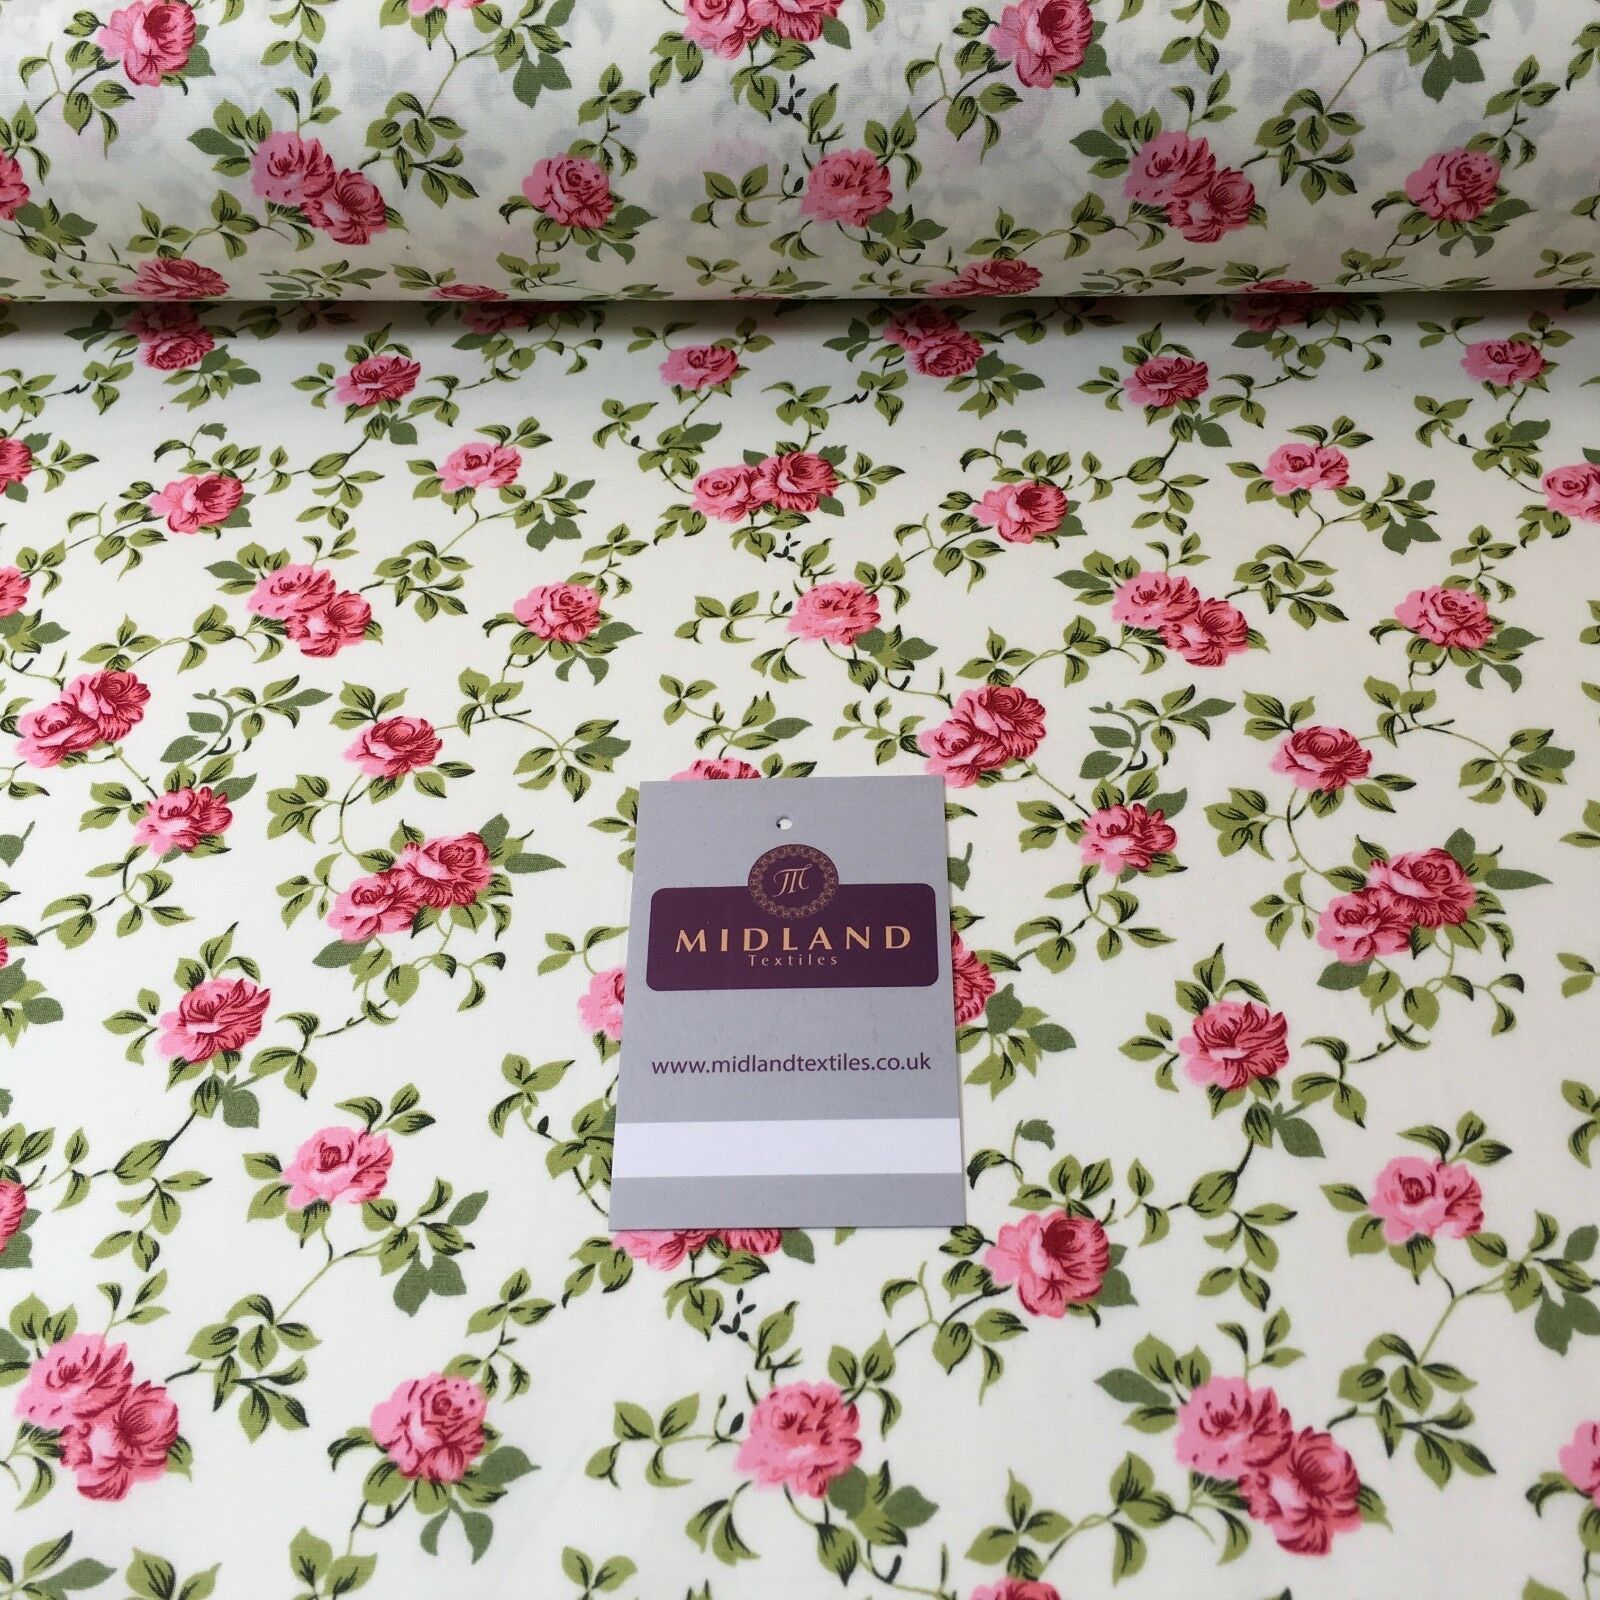 Floral Vintage Shabby Chic 100% Cotton printed fabric 44" M743 Mtex